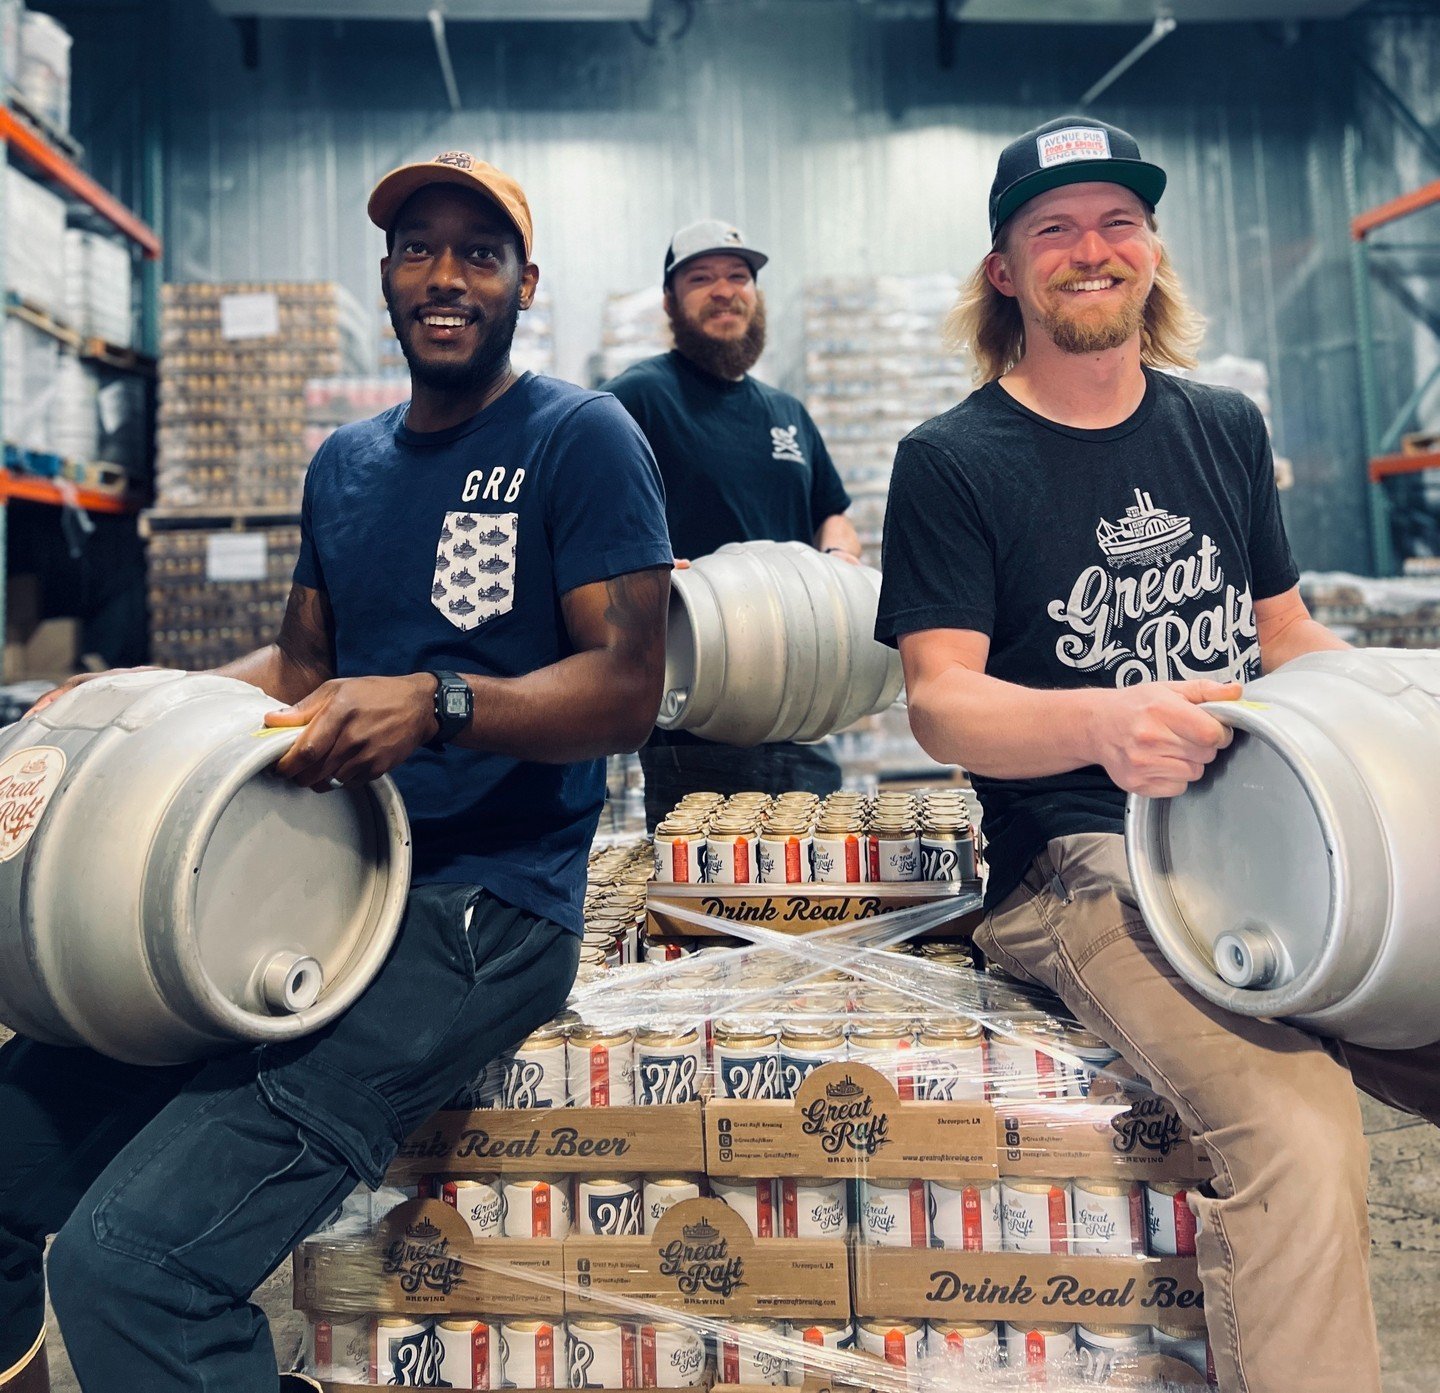 ⚠️ 🚨 🍺 FREE BEER! ⚠️ 🚨 🍺

These guys have created some really fun beers for y'all to try this Saturday at Crush the Pin. Like this post and tag your beer-loving bestie in the comments for a chance to win a pair of tickets! ($65 value) 

It's the 